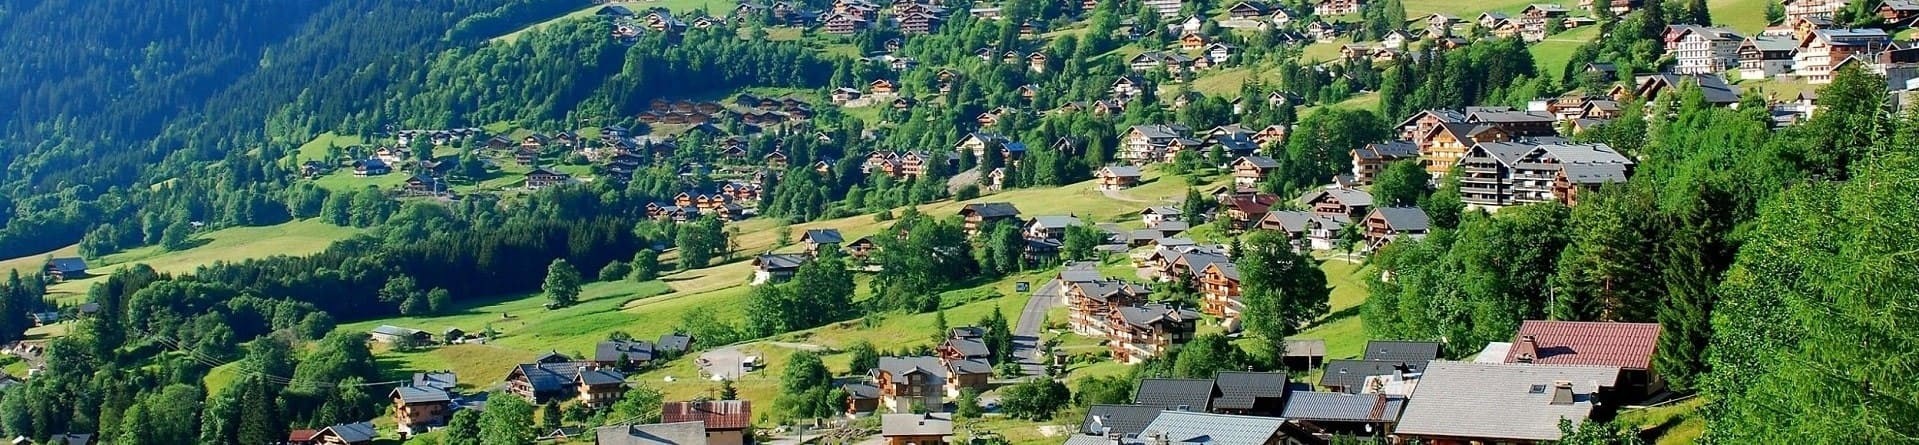 Holiday home in Chatel Summer ©jmgouedard